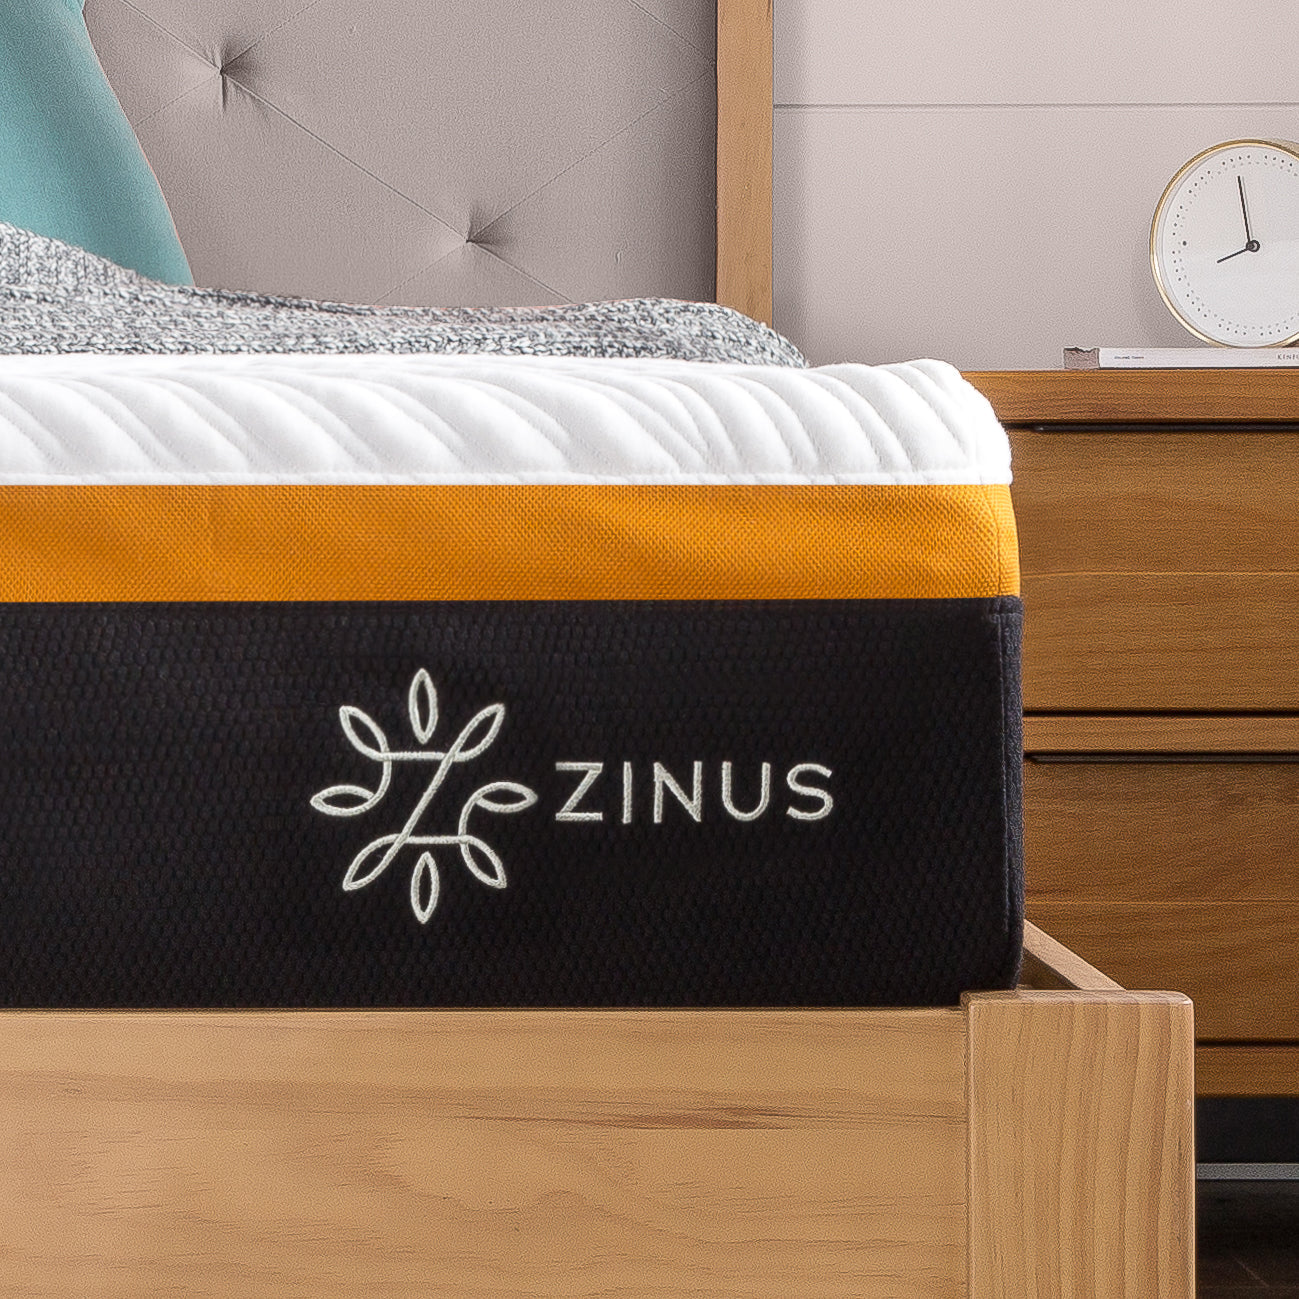 Tilam Zinus Hybrid Copper Memory Foam Smooth Top Spring Cool Mattress 10" [CLEARANCE]